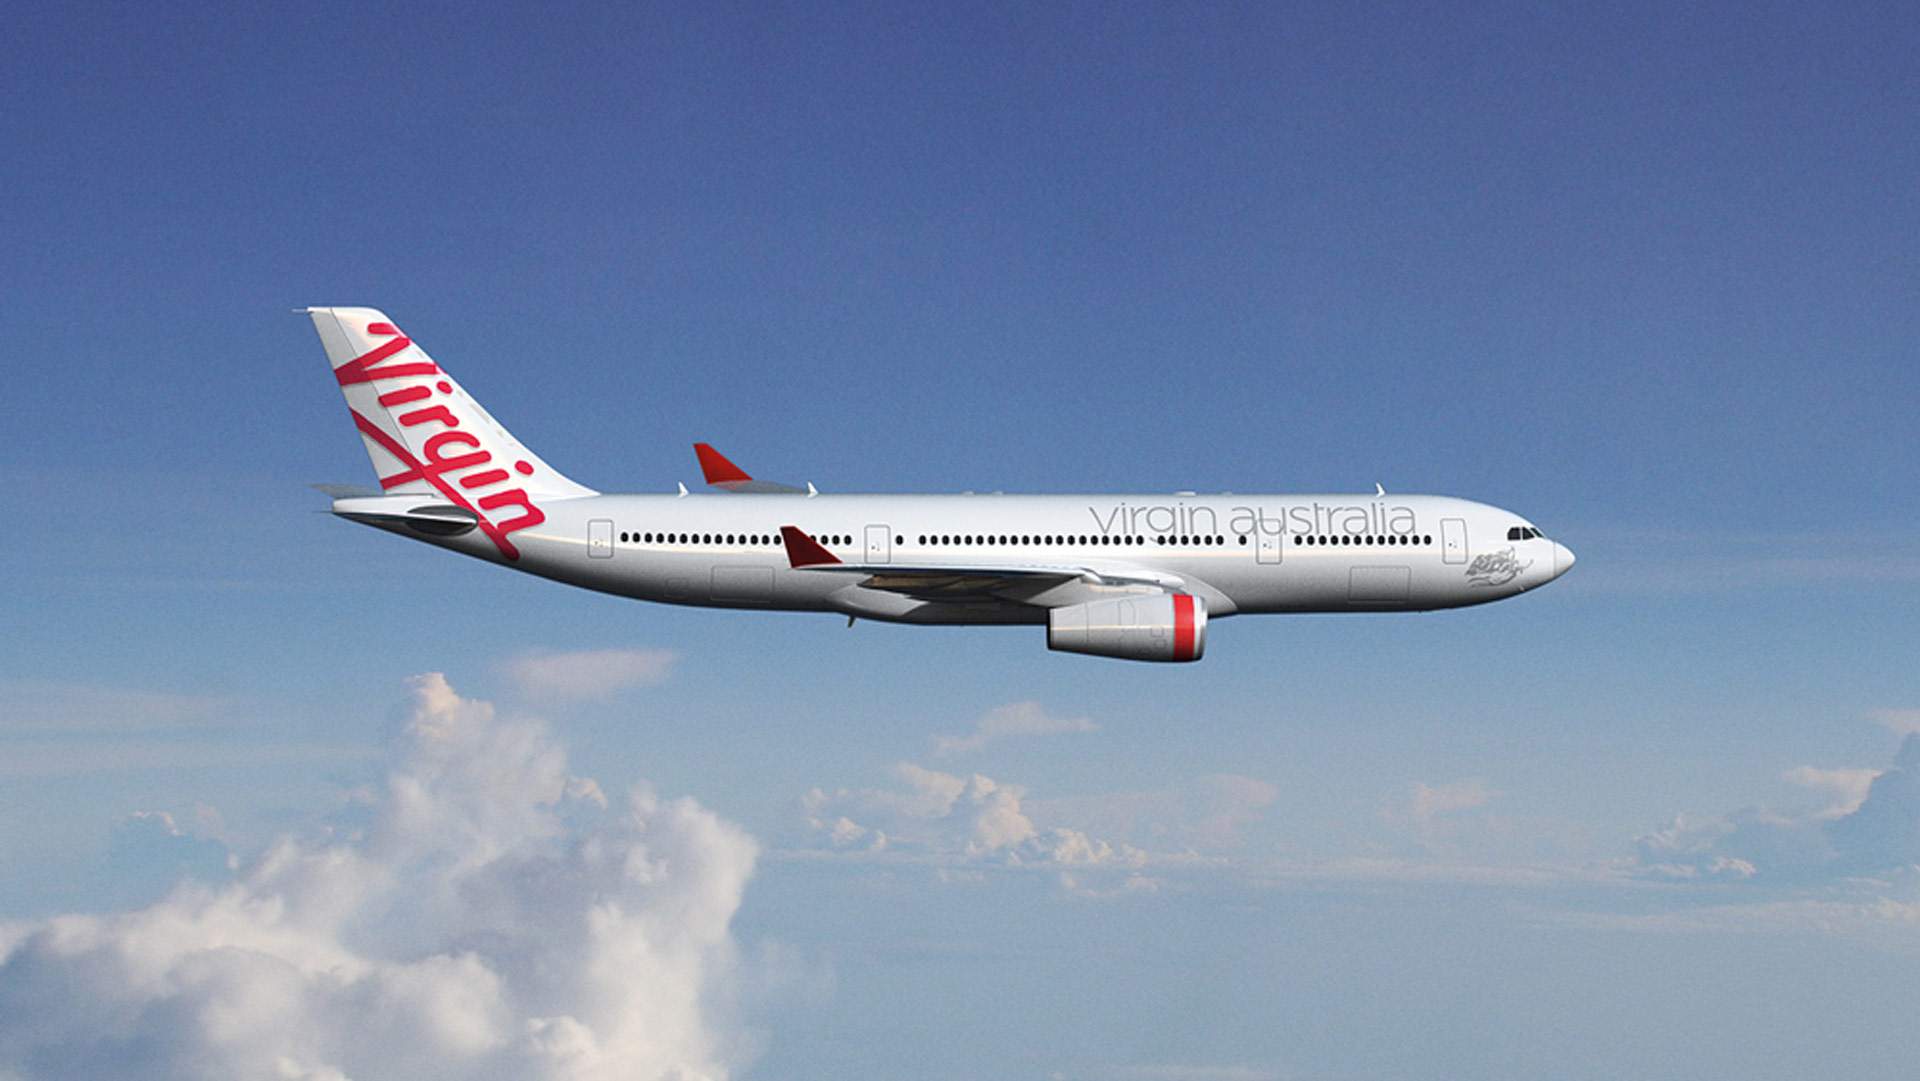 Virgin Has Extended Its Middle Seat Lottery Until the Middle of 2023 with $45,000 in Prizes Up for Grabs